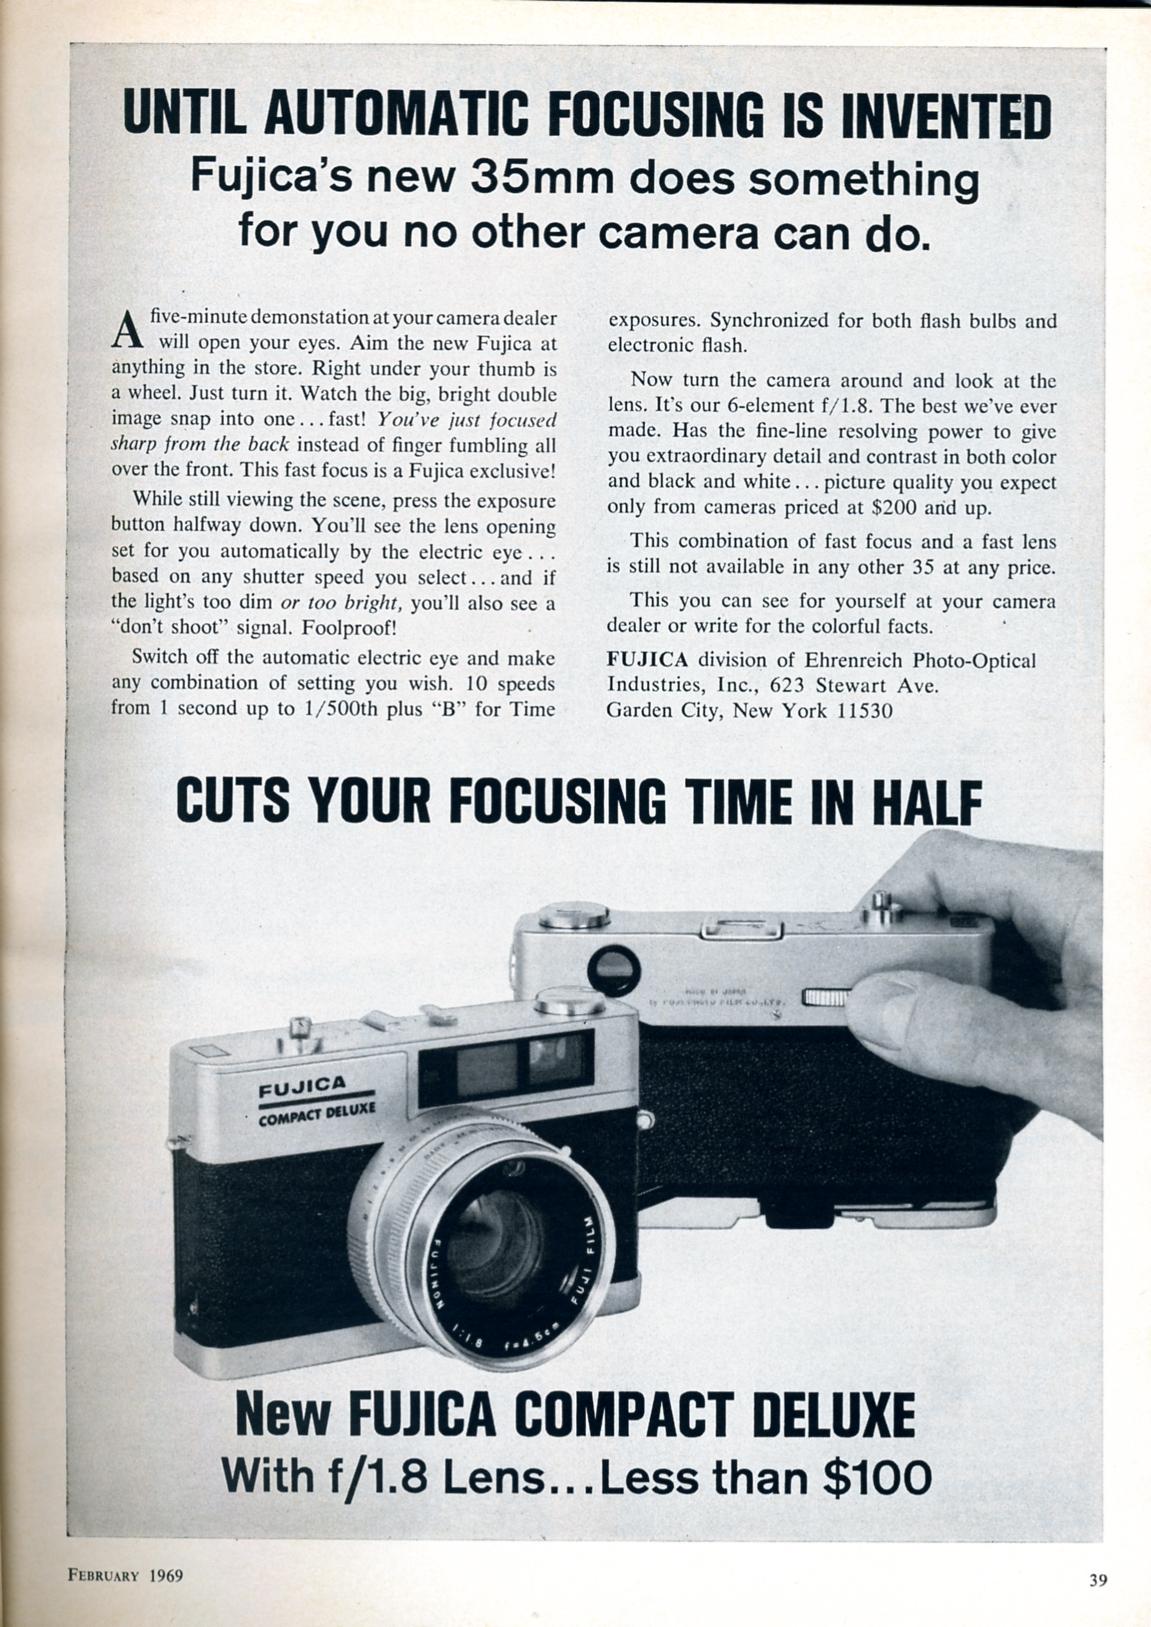 an ad for a digital camera from the 1950's